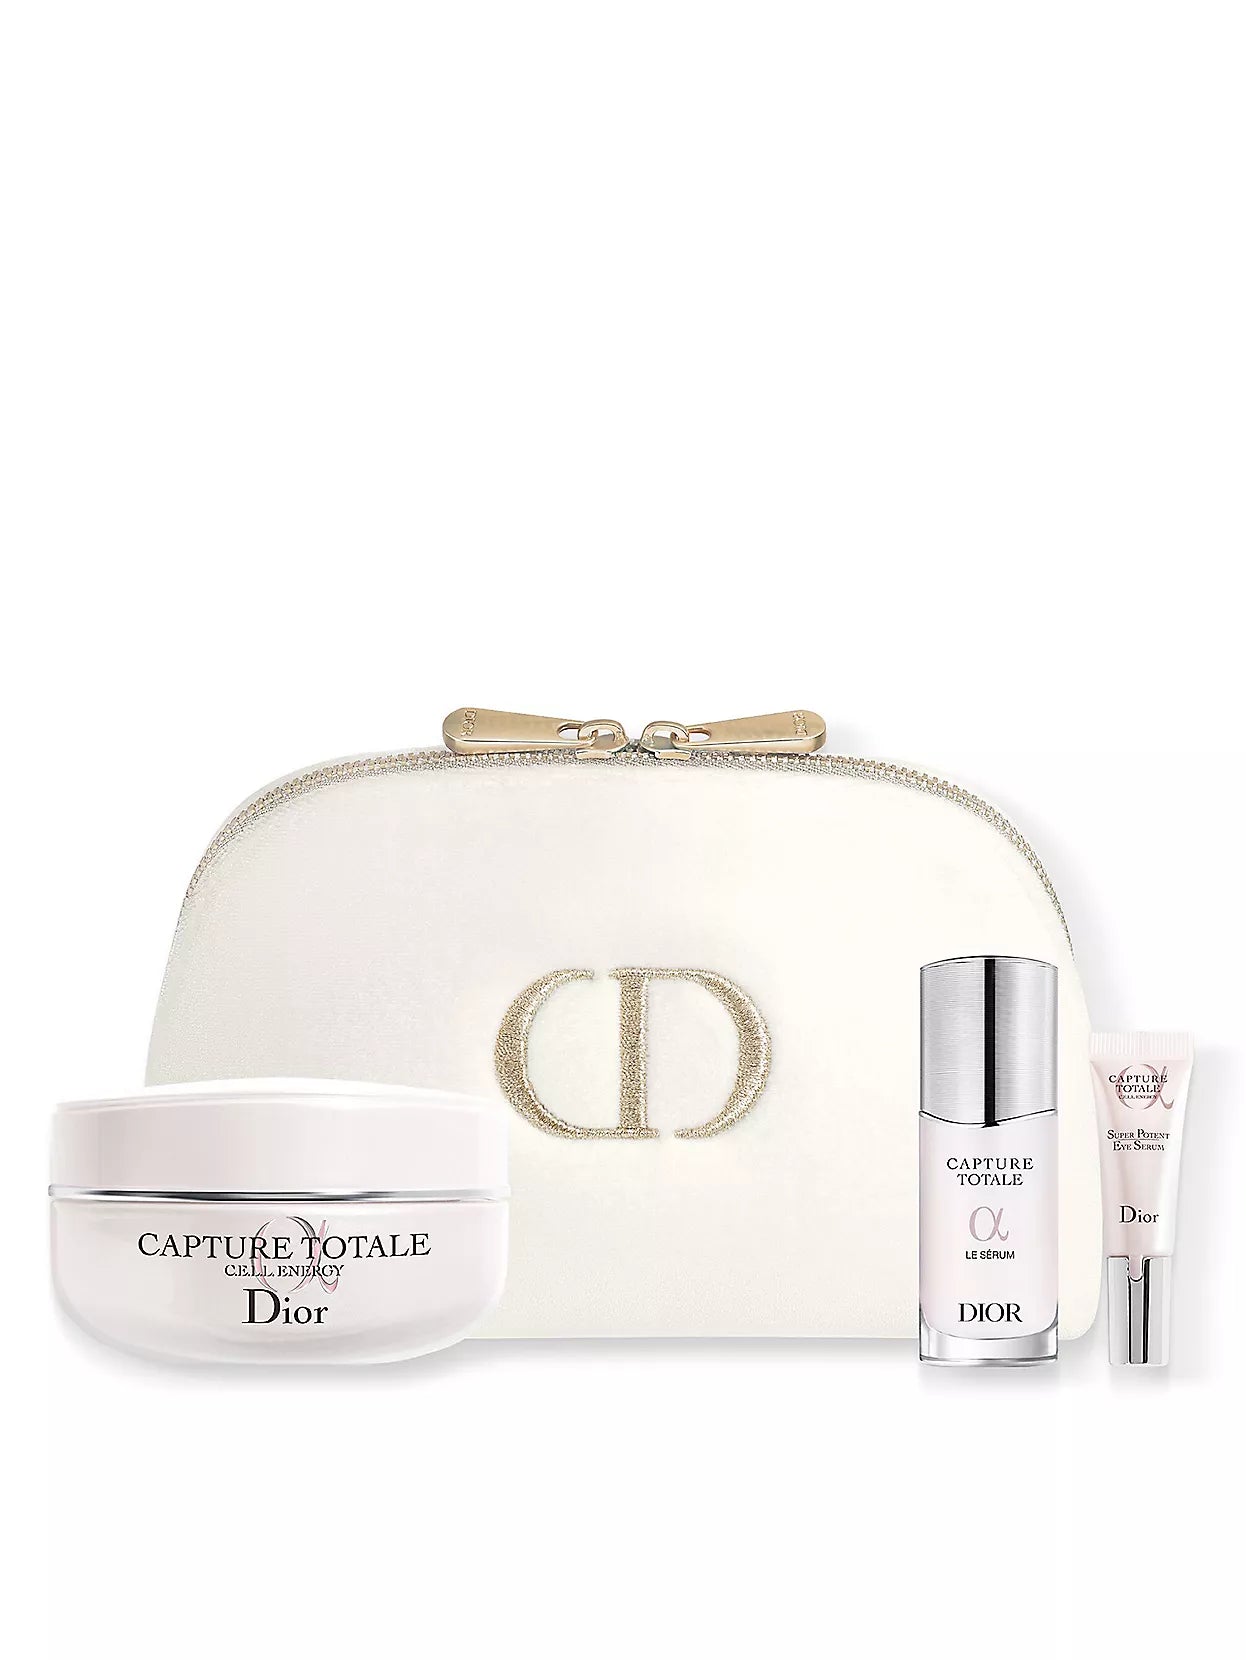 Dior Capture Totale Anti-Aging Limited-Edition Gift Set